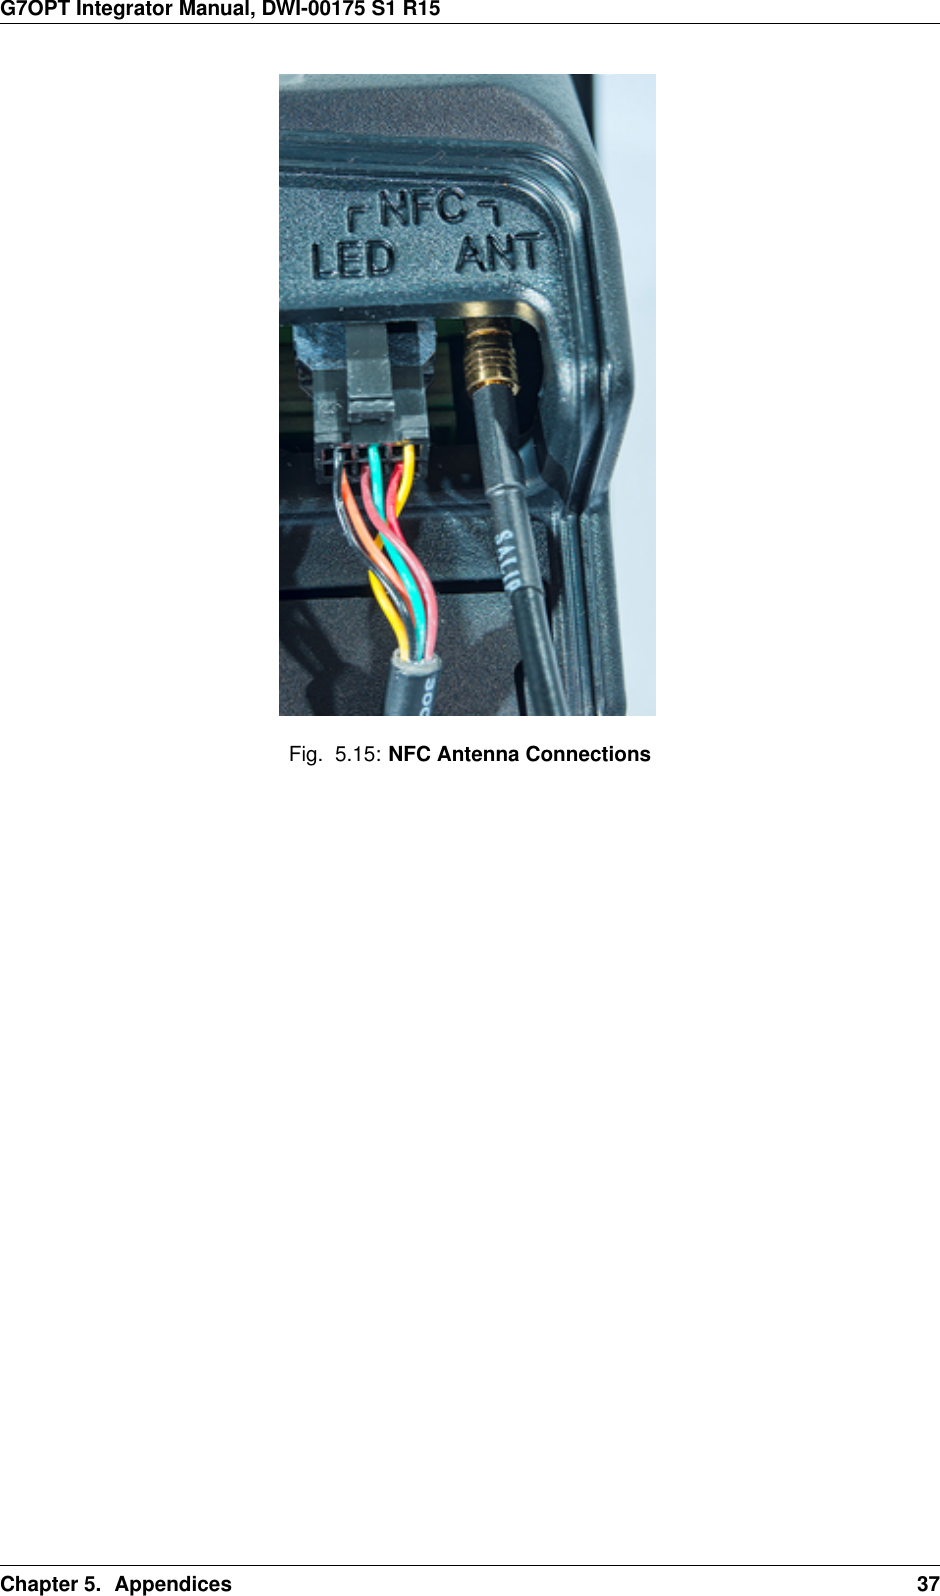 G7OPT Integrator Manual, DWI-00175 S1 R15Fig. 5.15: NFC Antenna ConnectionsChapter 5. Appendices 37